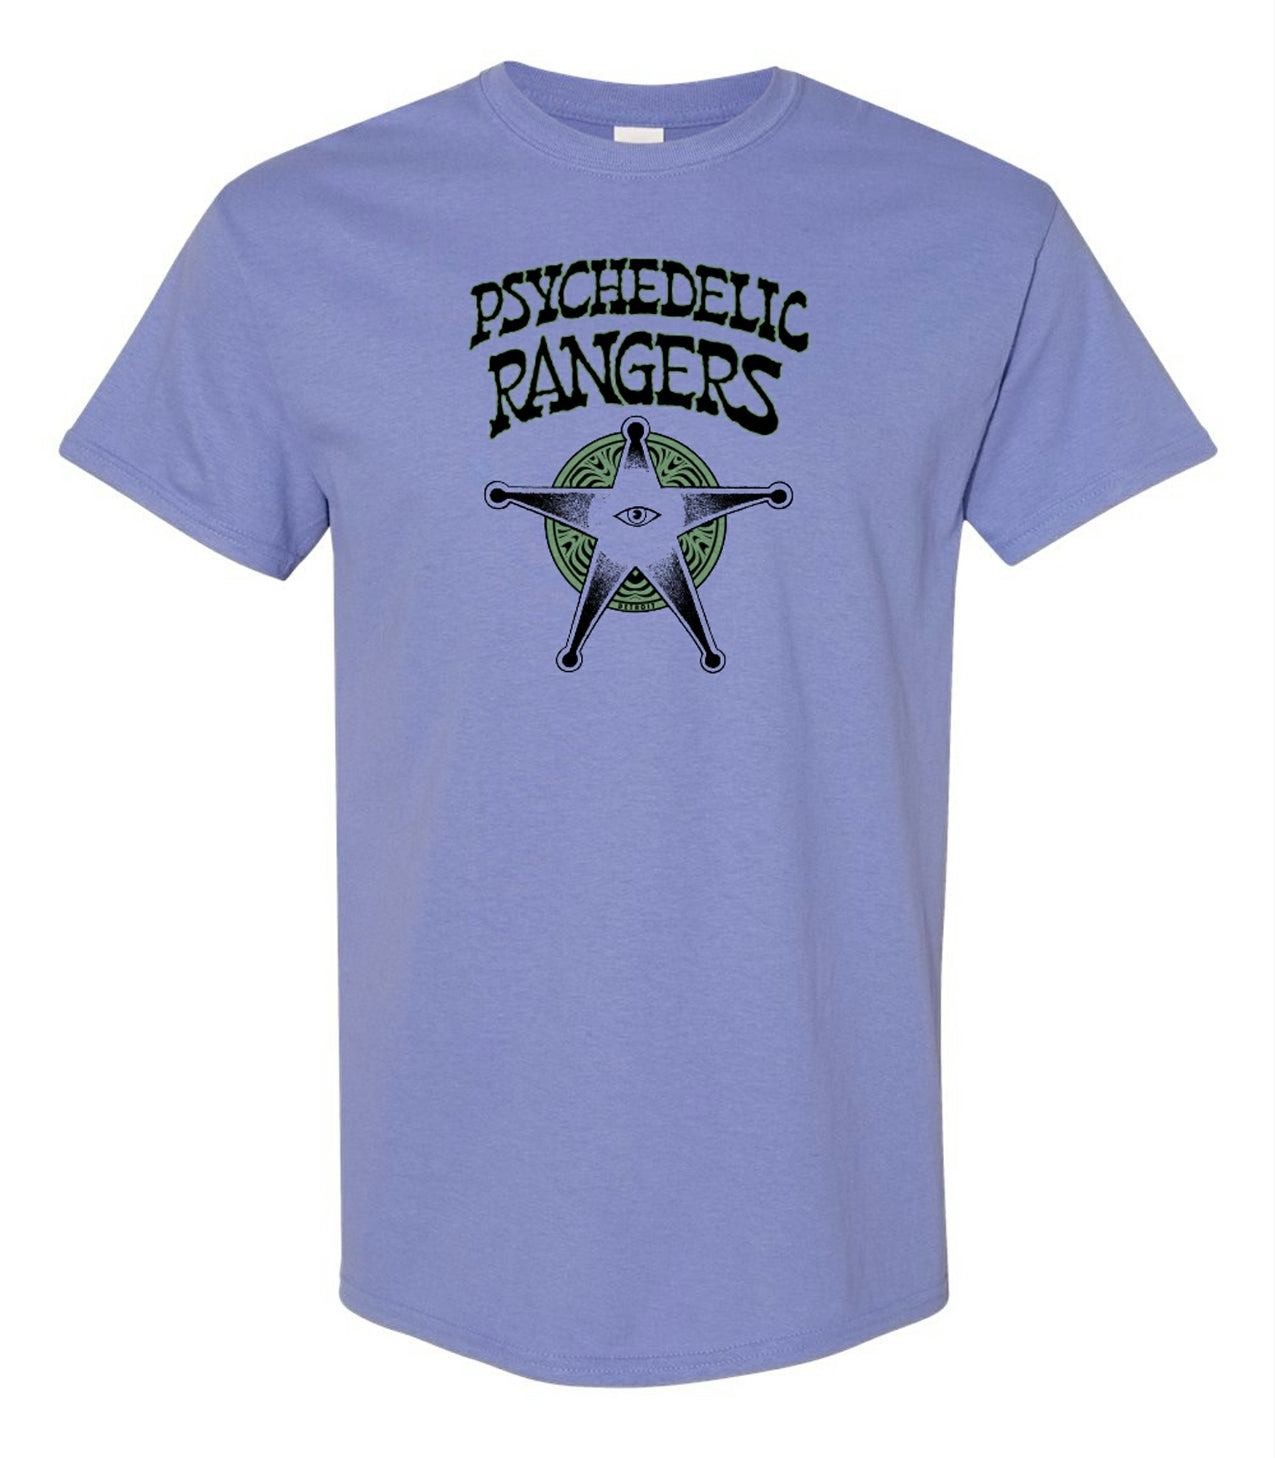 psychedelic rangers t shirt gary grimshaw